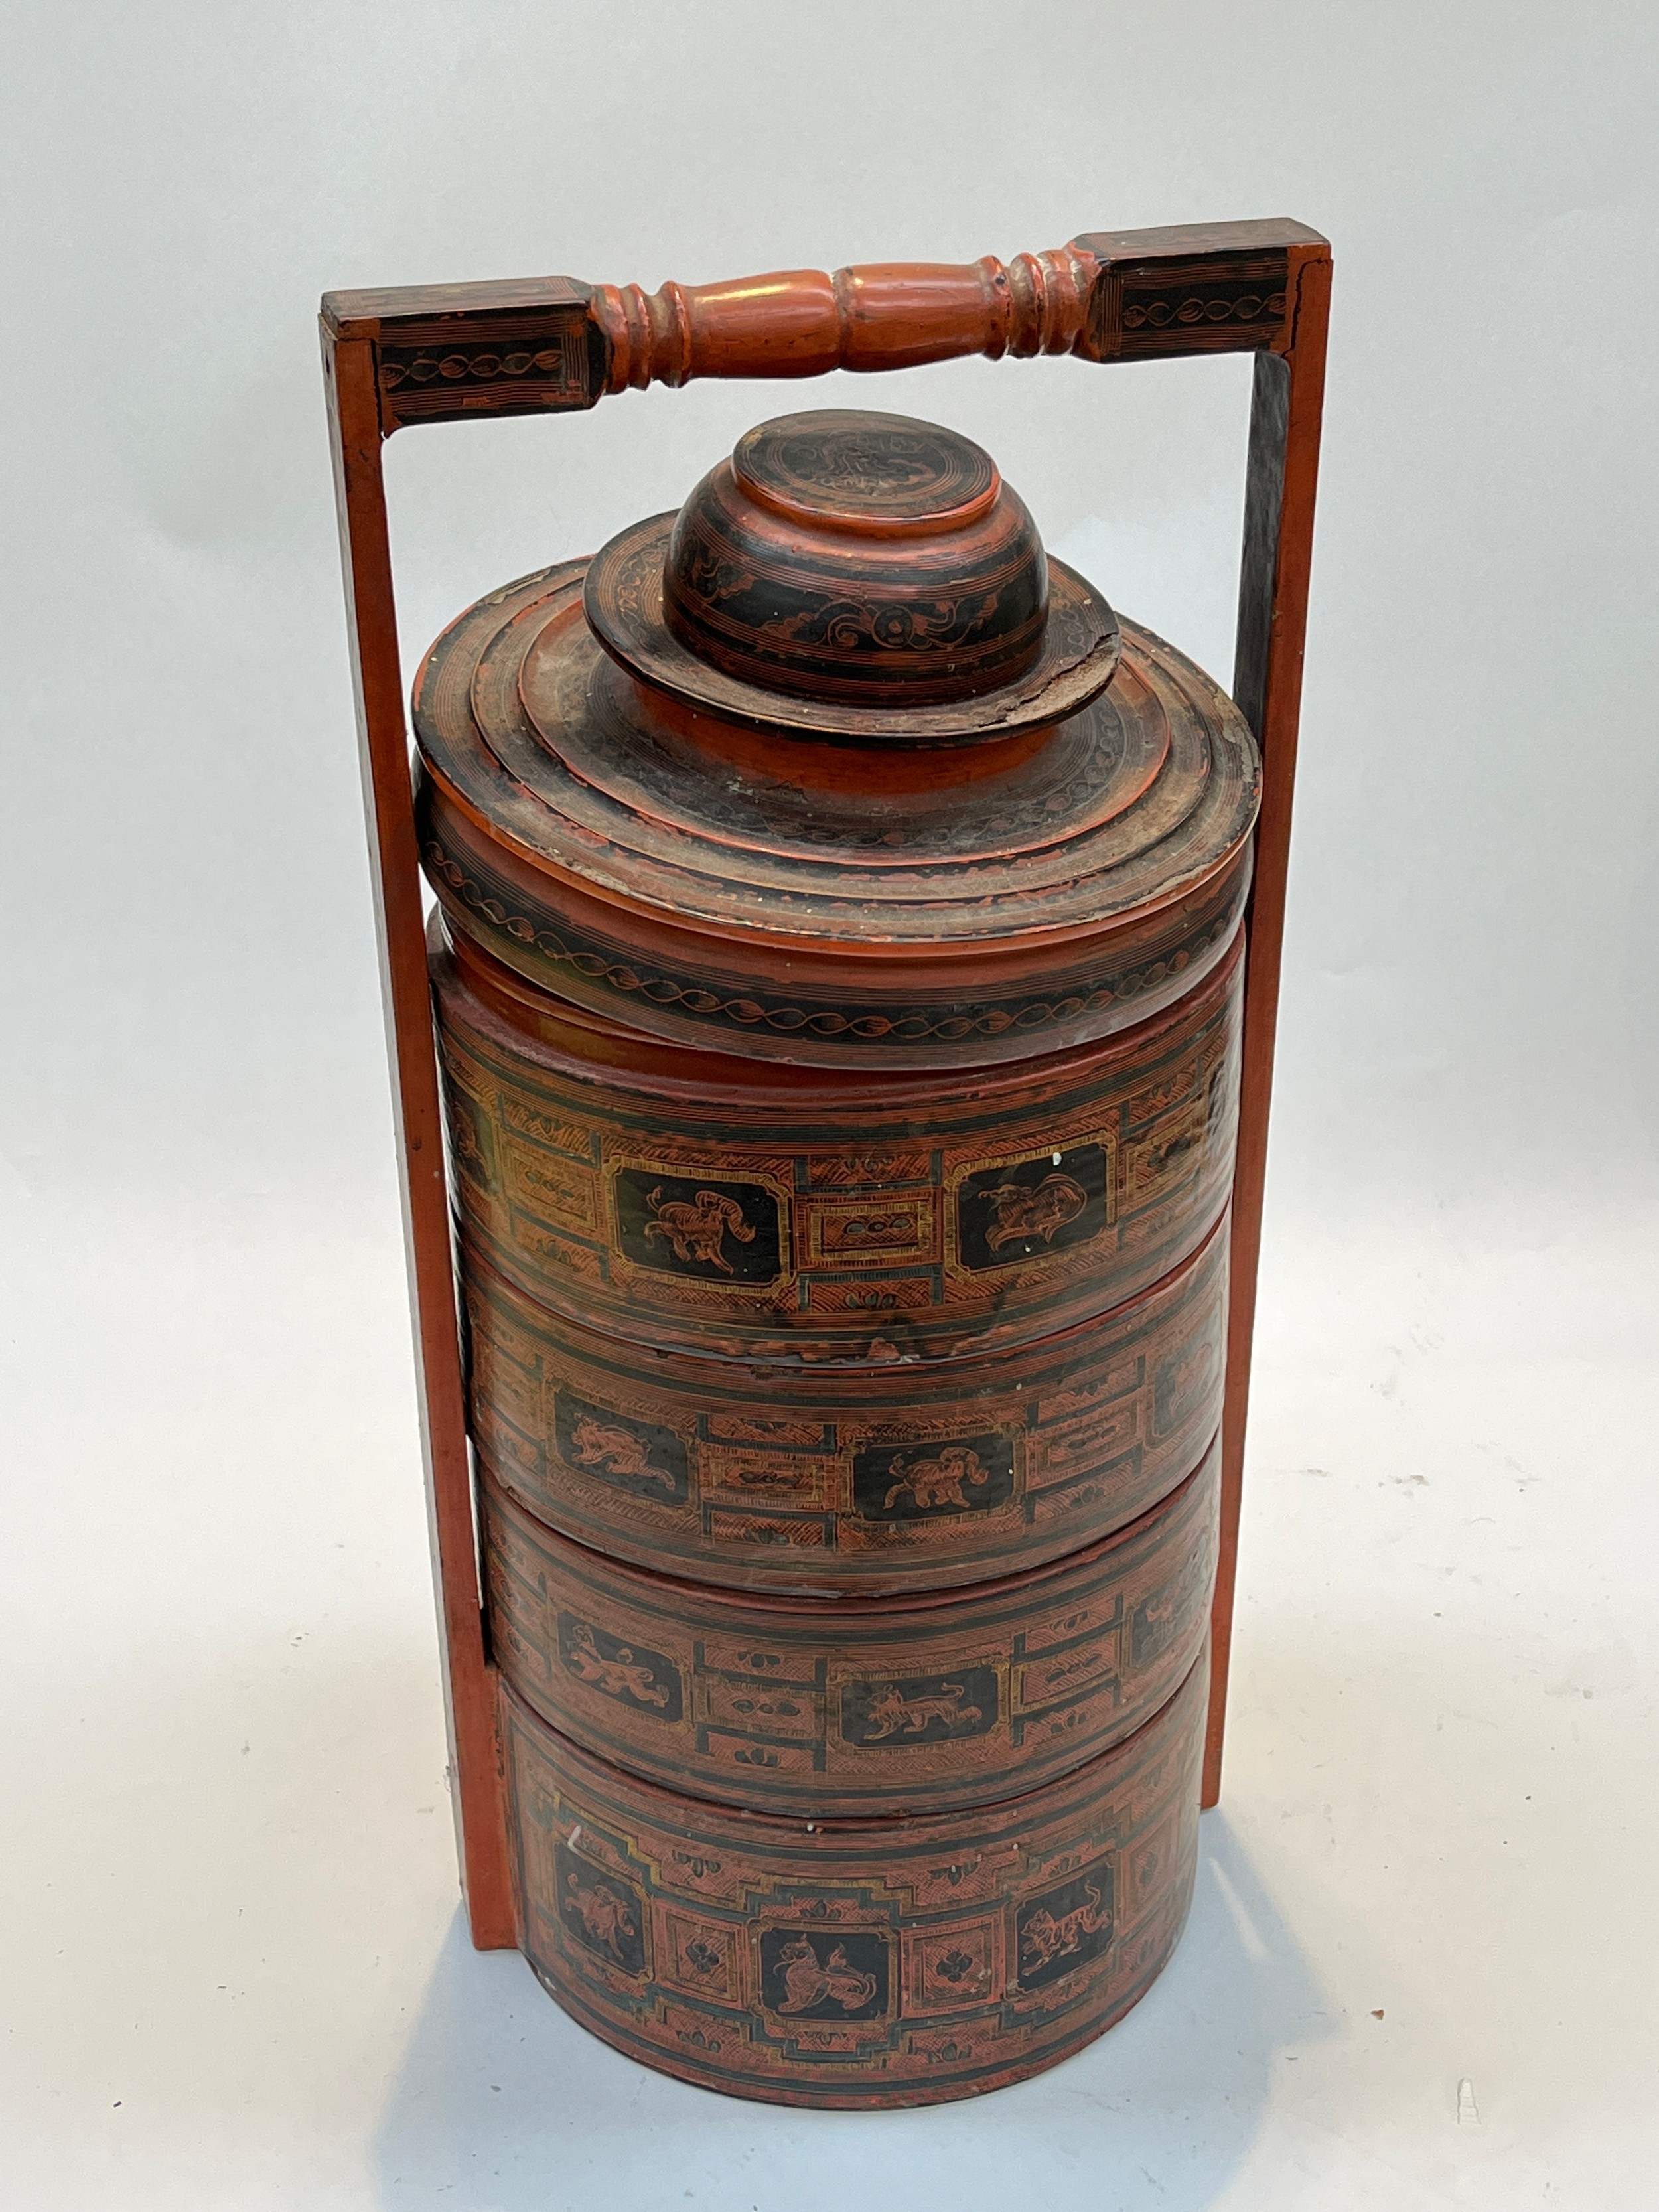 A Burmese lacquered tiffin box, multiple sections used for transporting food to the paddy fields